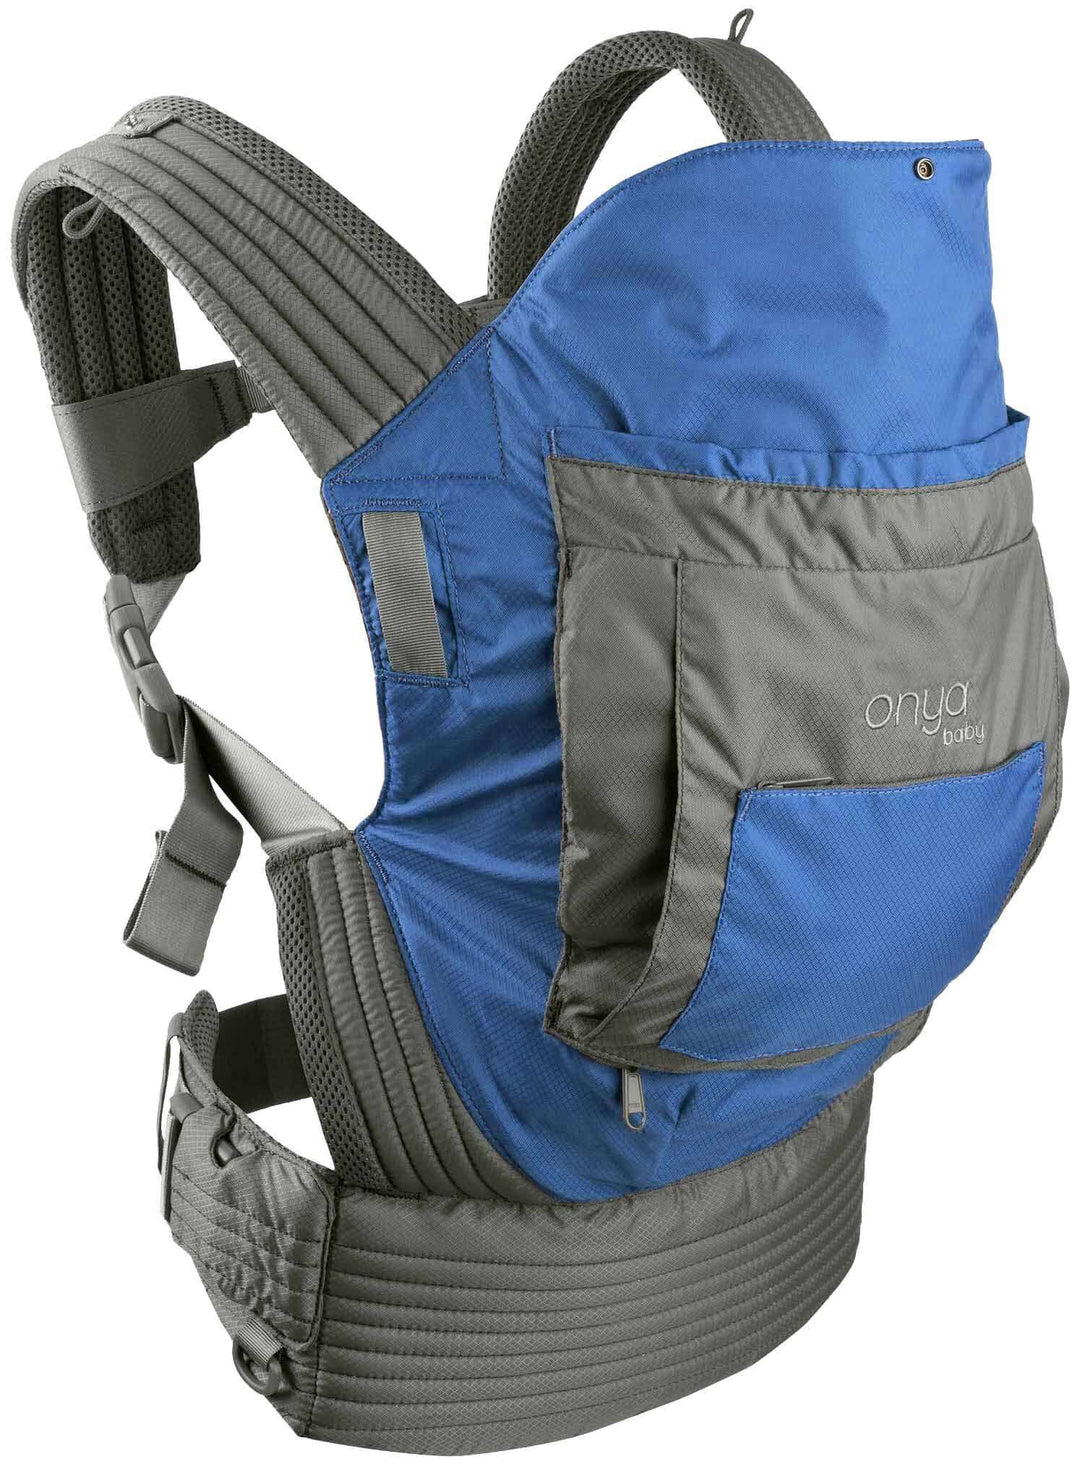 Side View of Tahoe Colored Outback Baby Carrier by Onya Baby